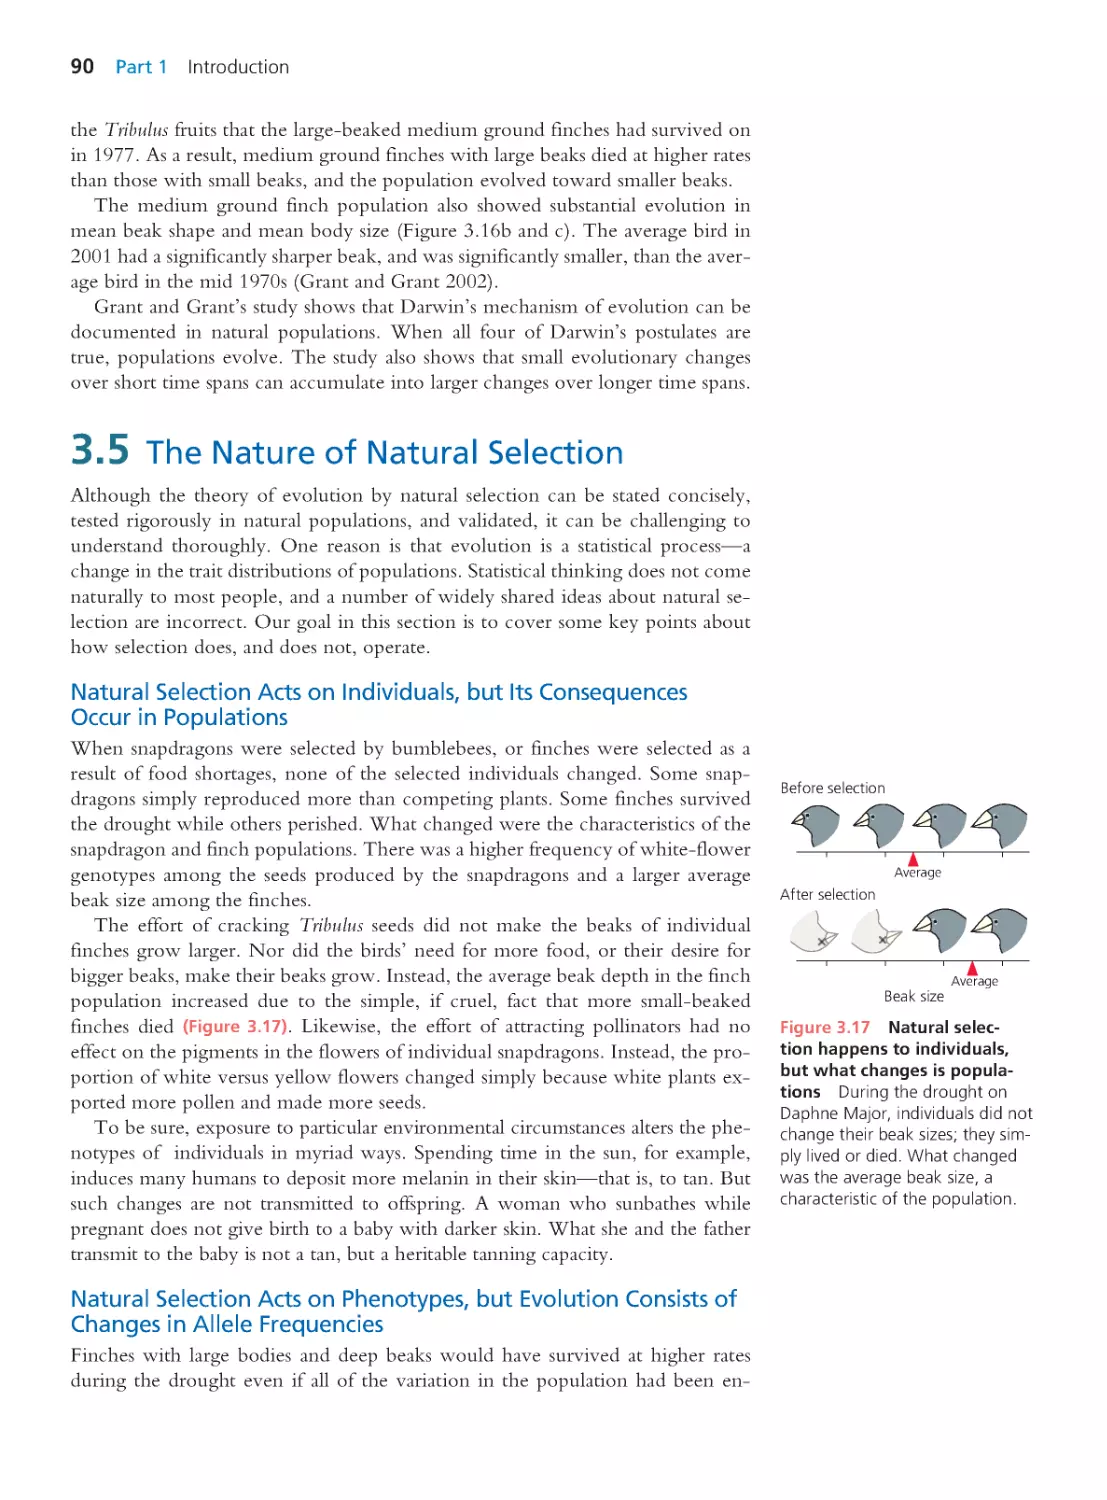 3.5 The Nature of Natural Selection